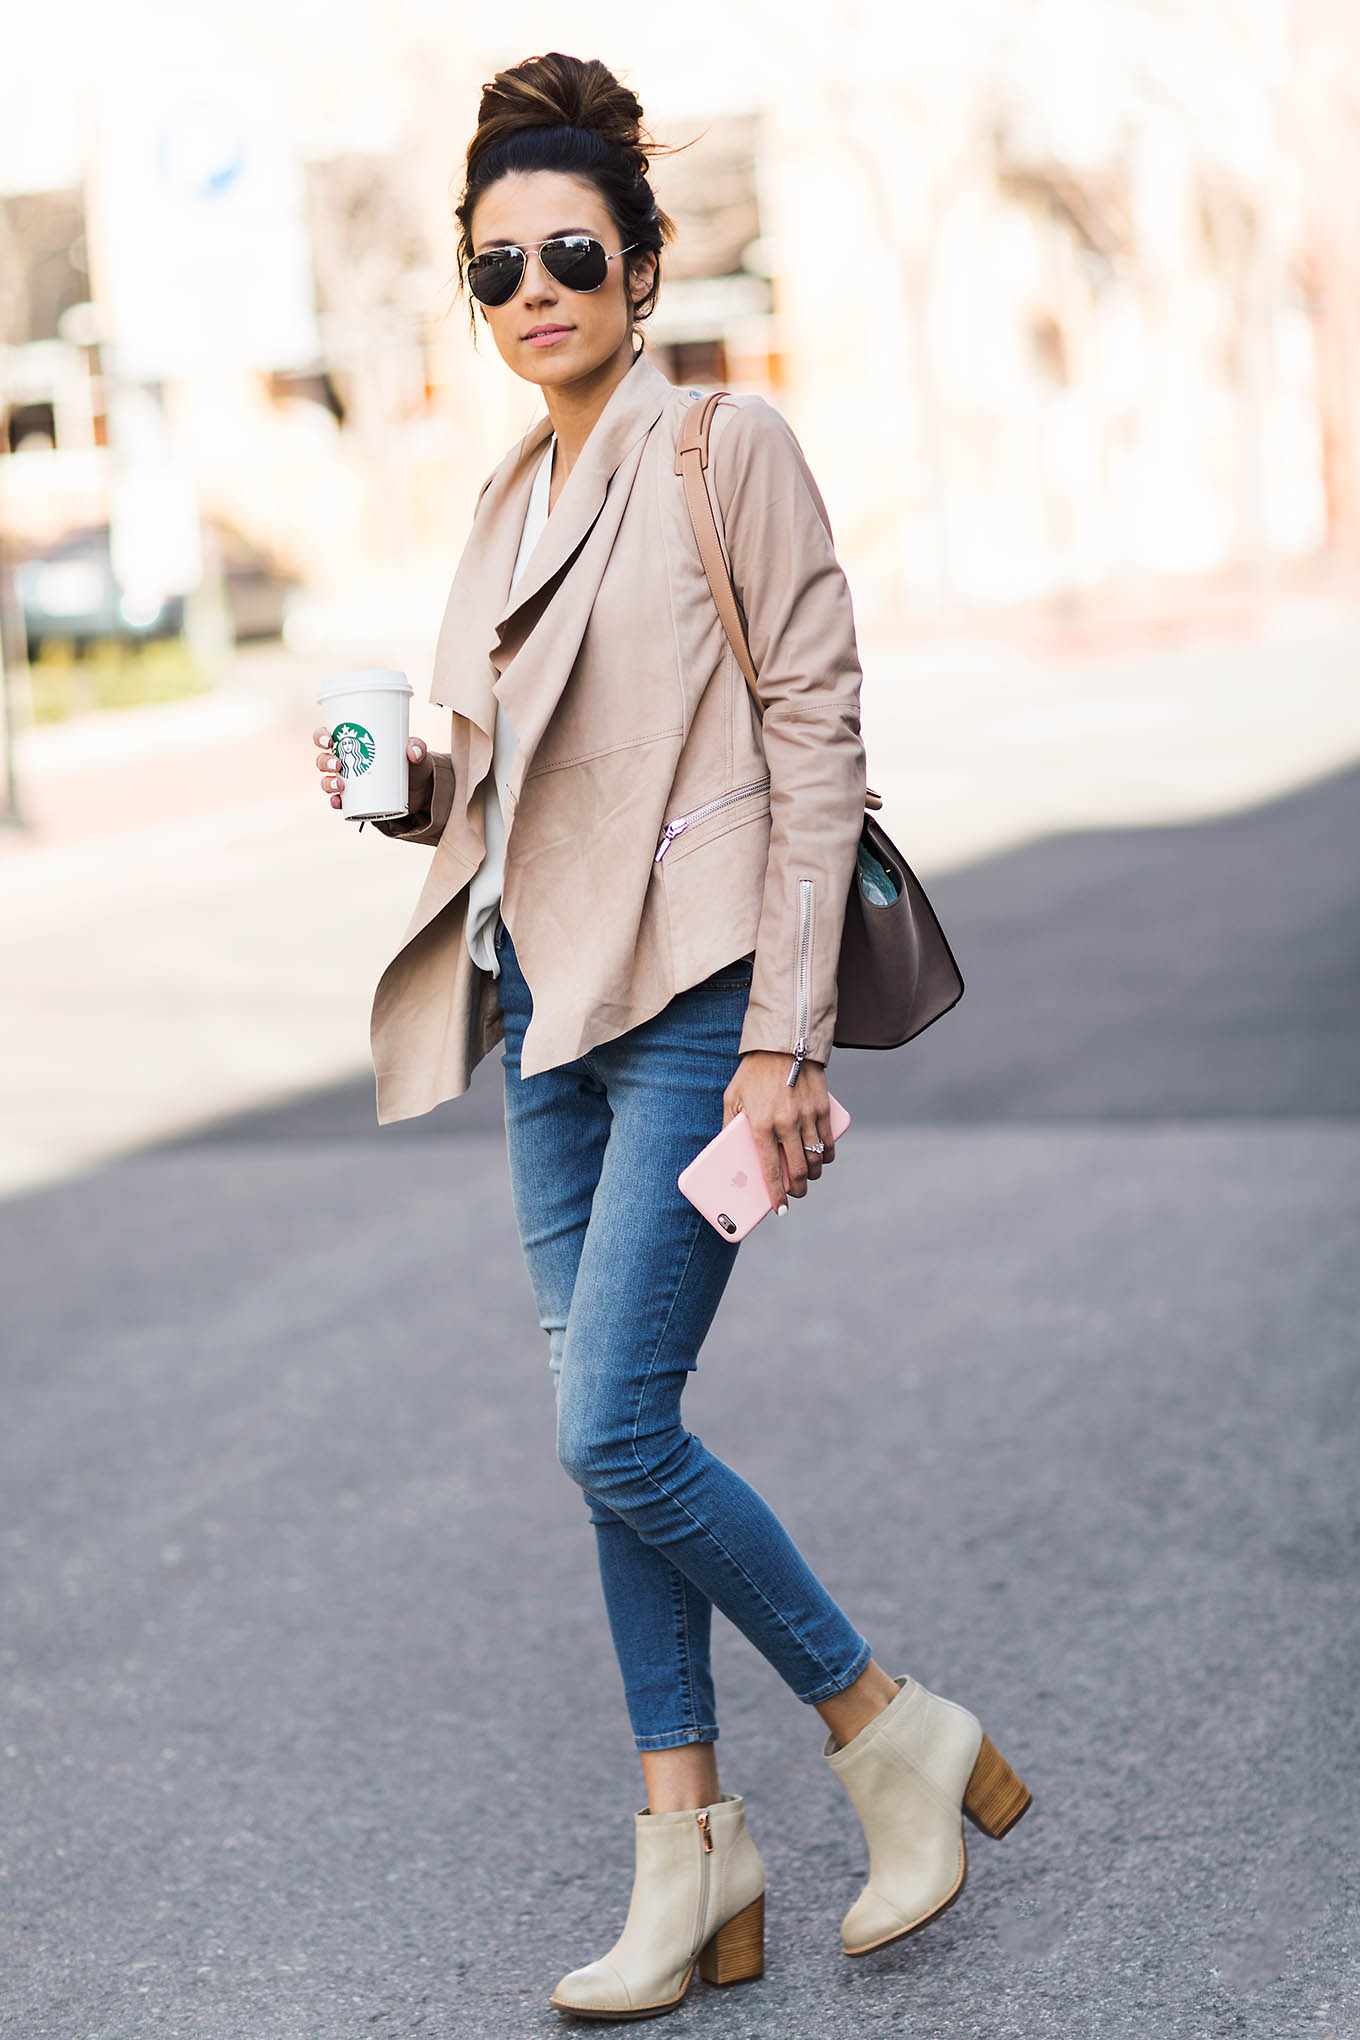 Neutral spring style